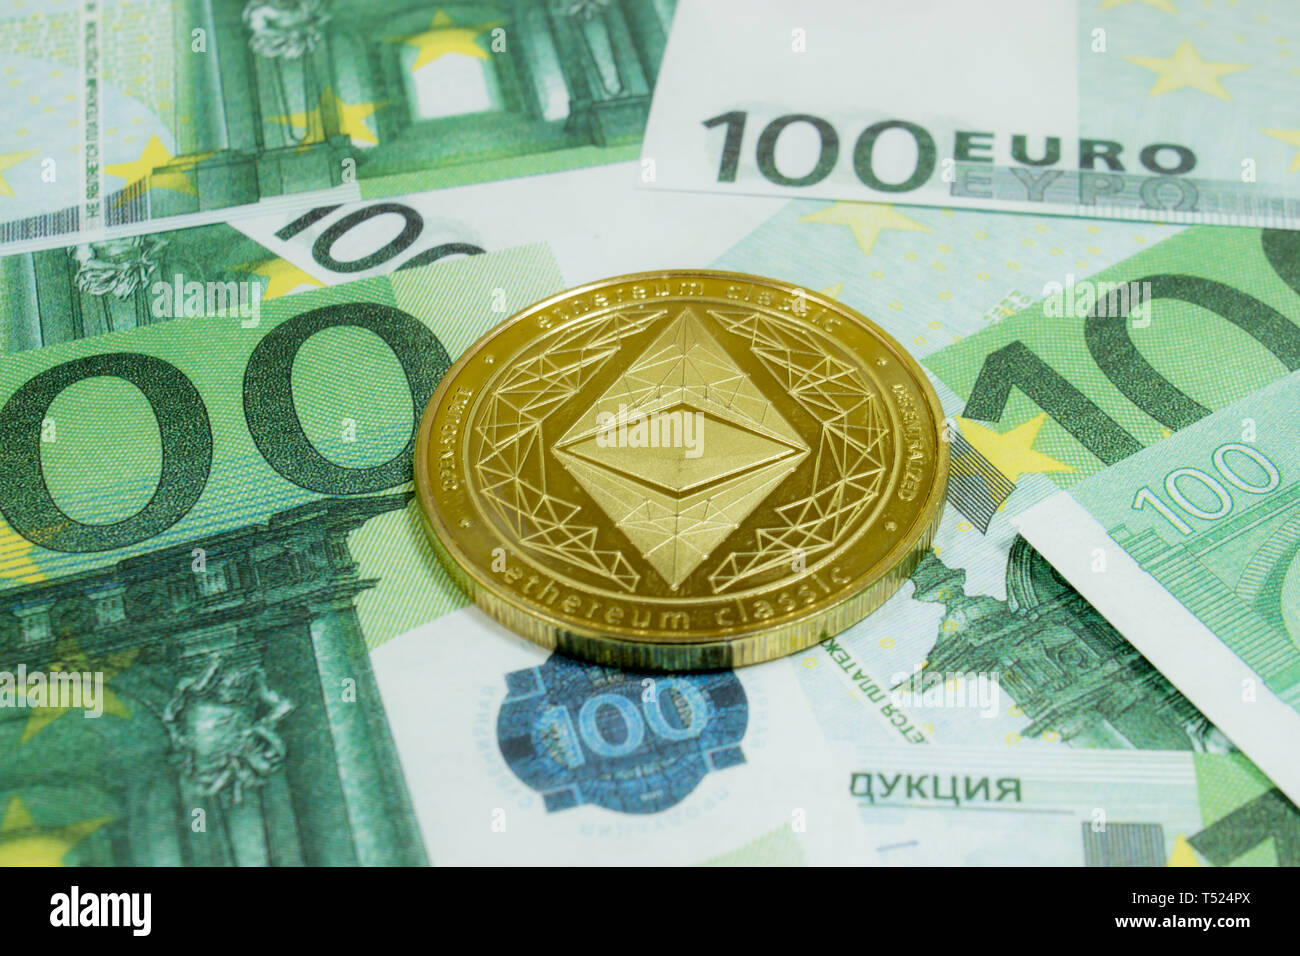 Close-up of Ethereum coins on 100 Euro banknotes. Crypto currency ETC. Stock Photo